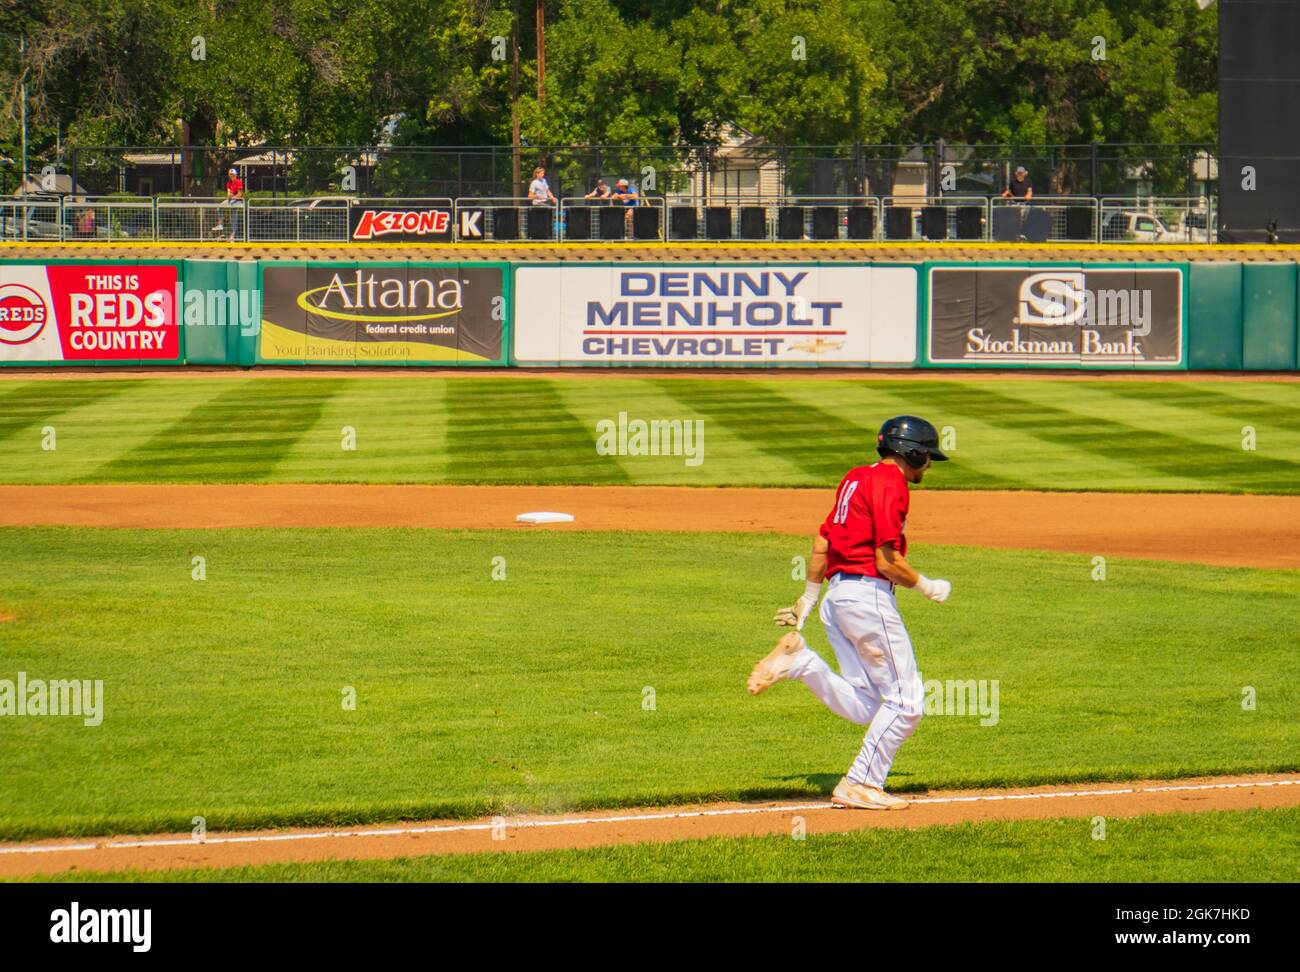 baseball player running the bases after a hit Stock Photo